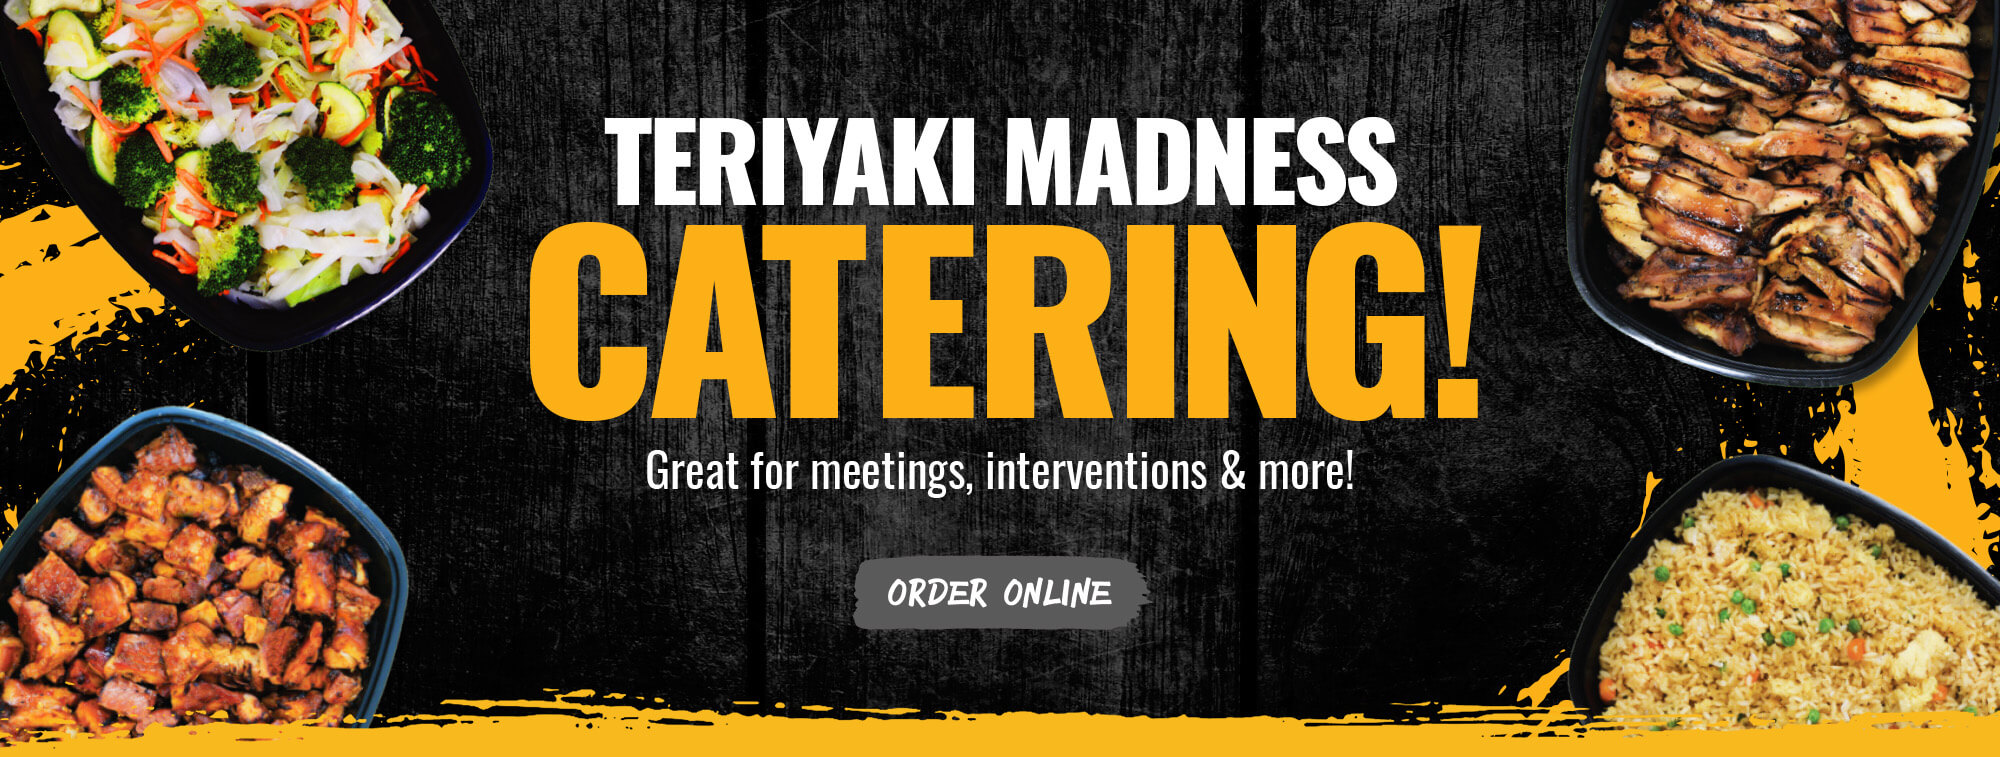 Click here to order catering online